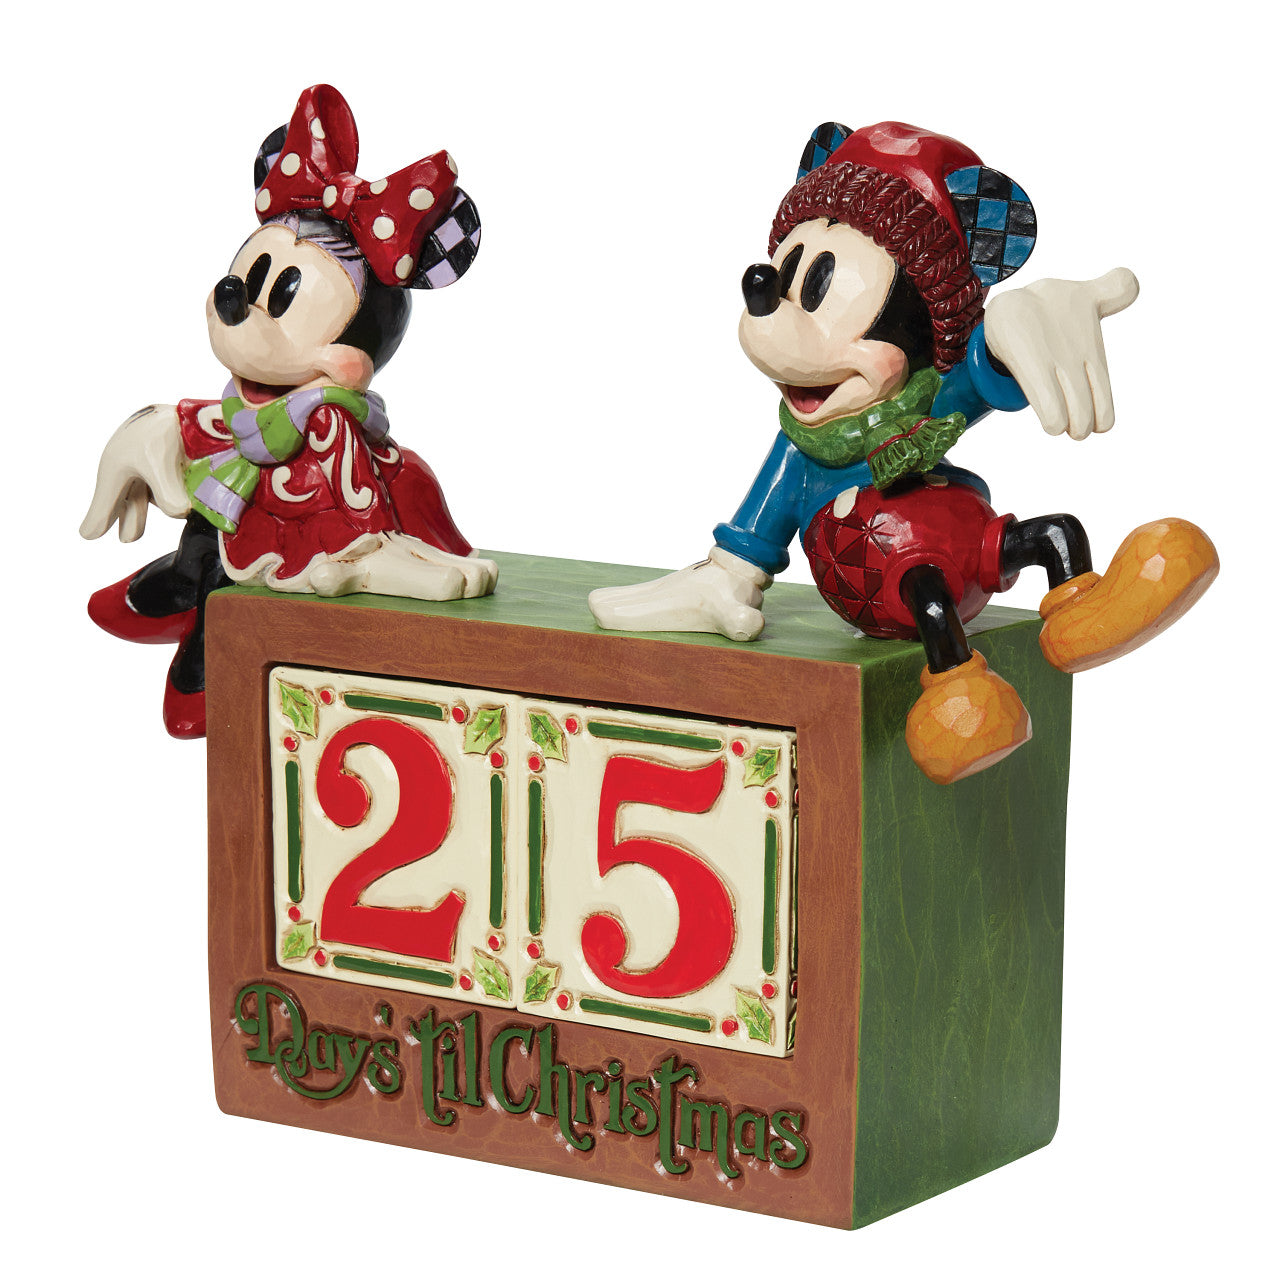 The Christmas Countdown - Mickey and Minnie Perpetual Calendar